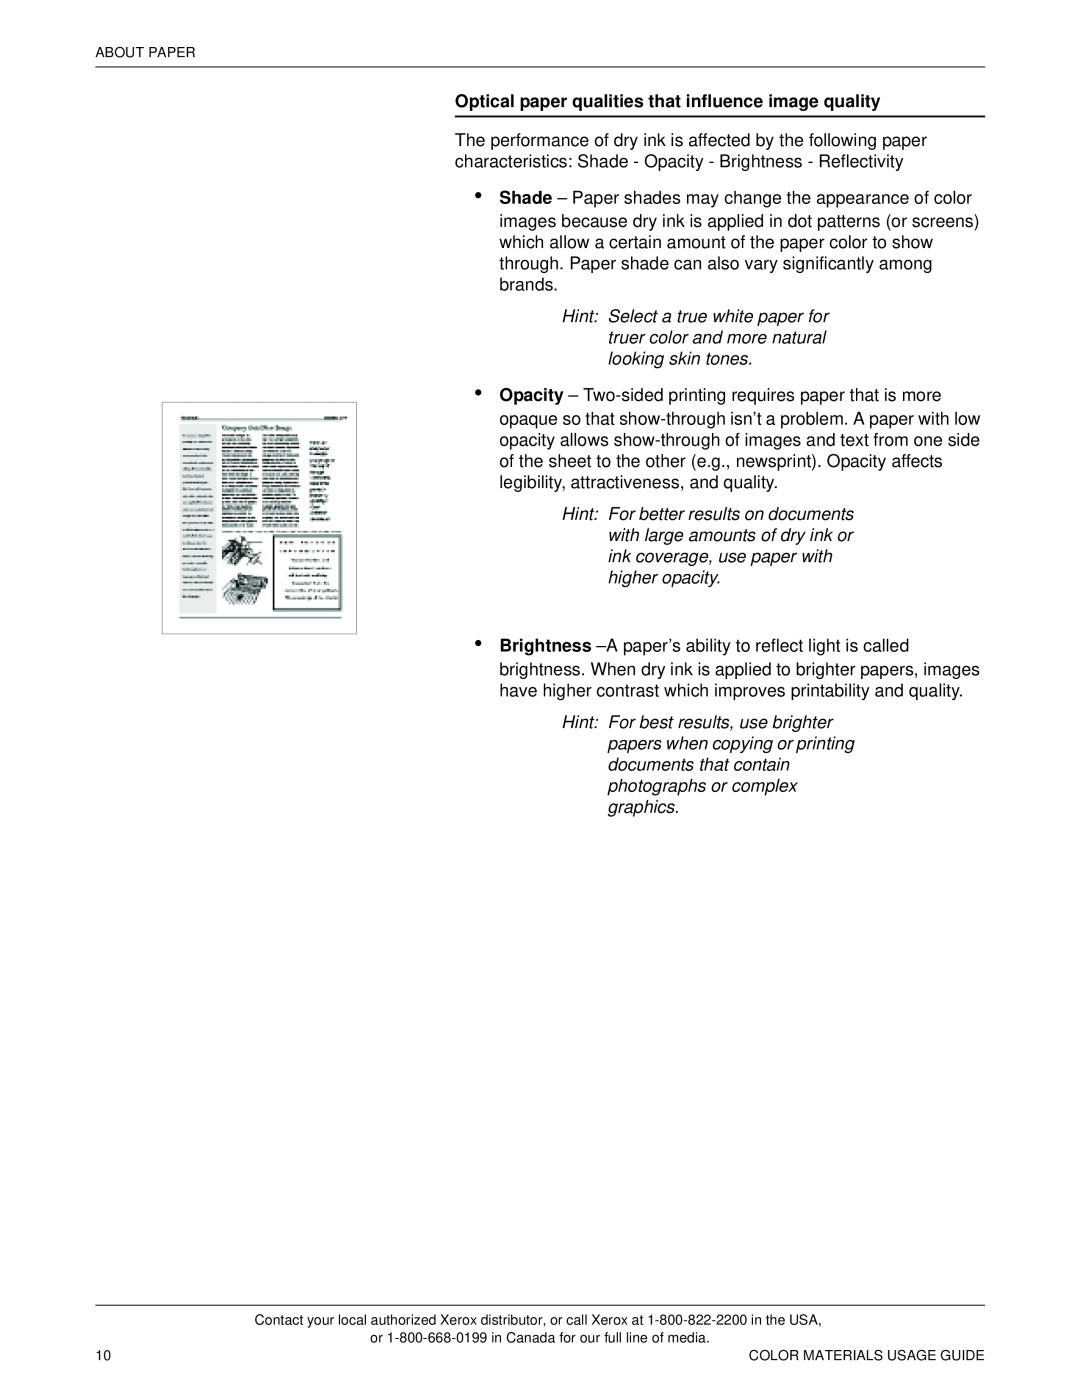 Xerox 12 manual About Paper, Color Materials Usage Guide 